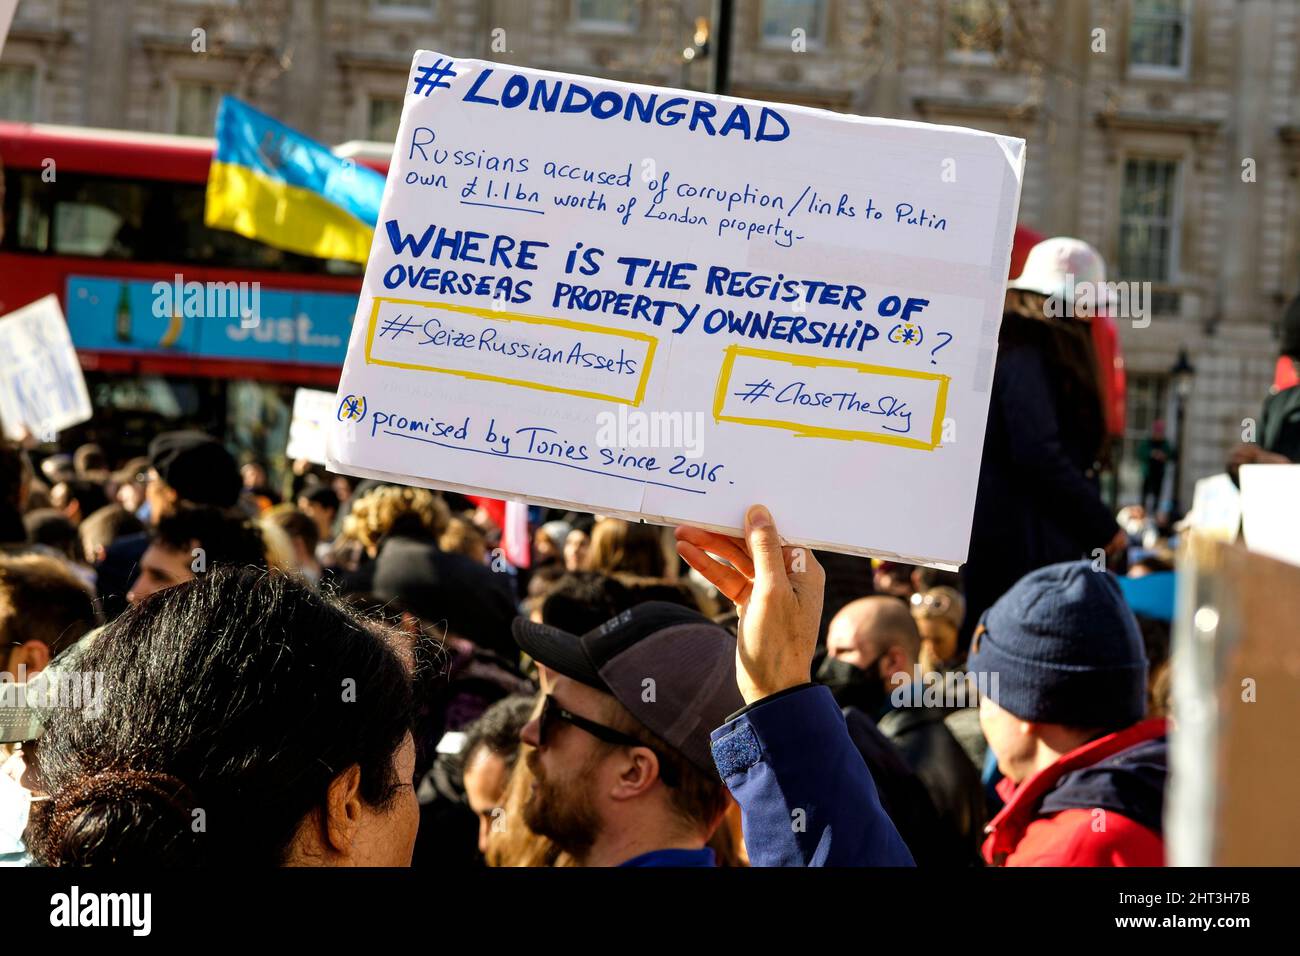 26th February 2022: Ukrainian nationals and pro-Ukraine supporters rally in Whitehall  to protest against the Russian invasion of Ukraine. London, United Kingdom. Pictured: A protester holds a placard criticising the UK government's failure to act against Russian citizens' assets in London. Stock Photo